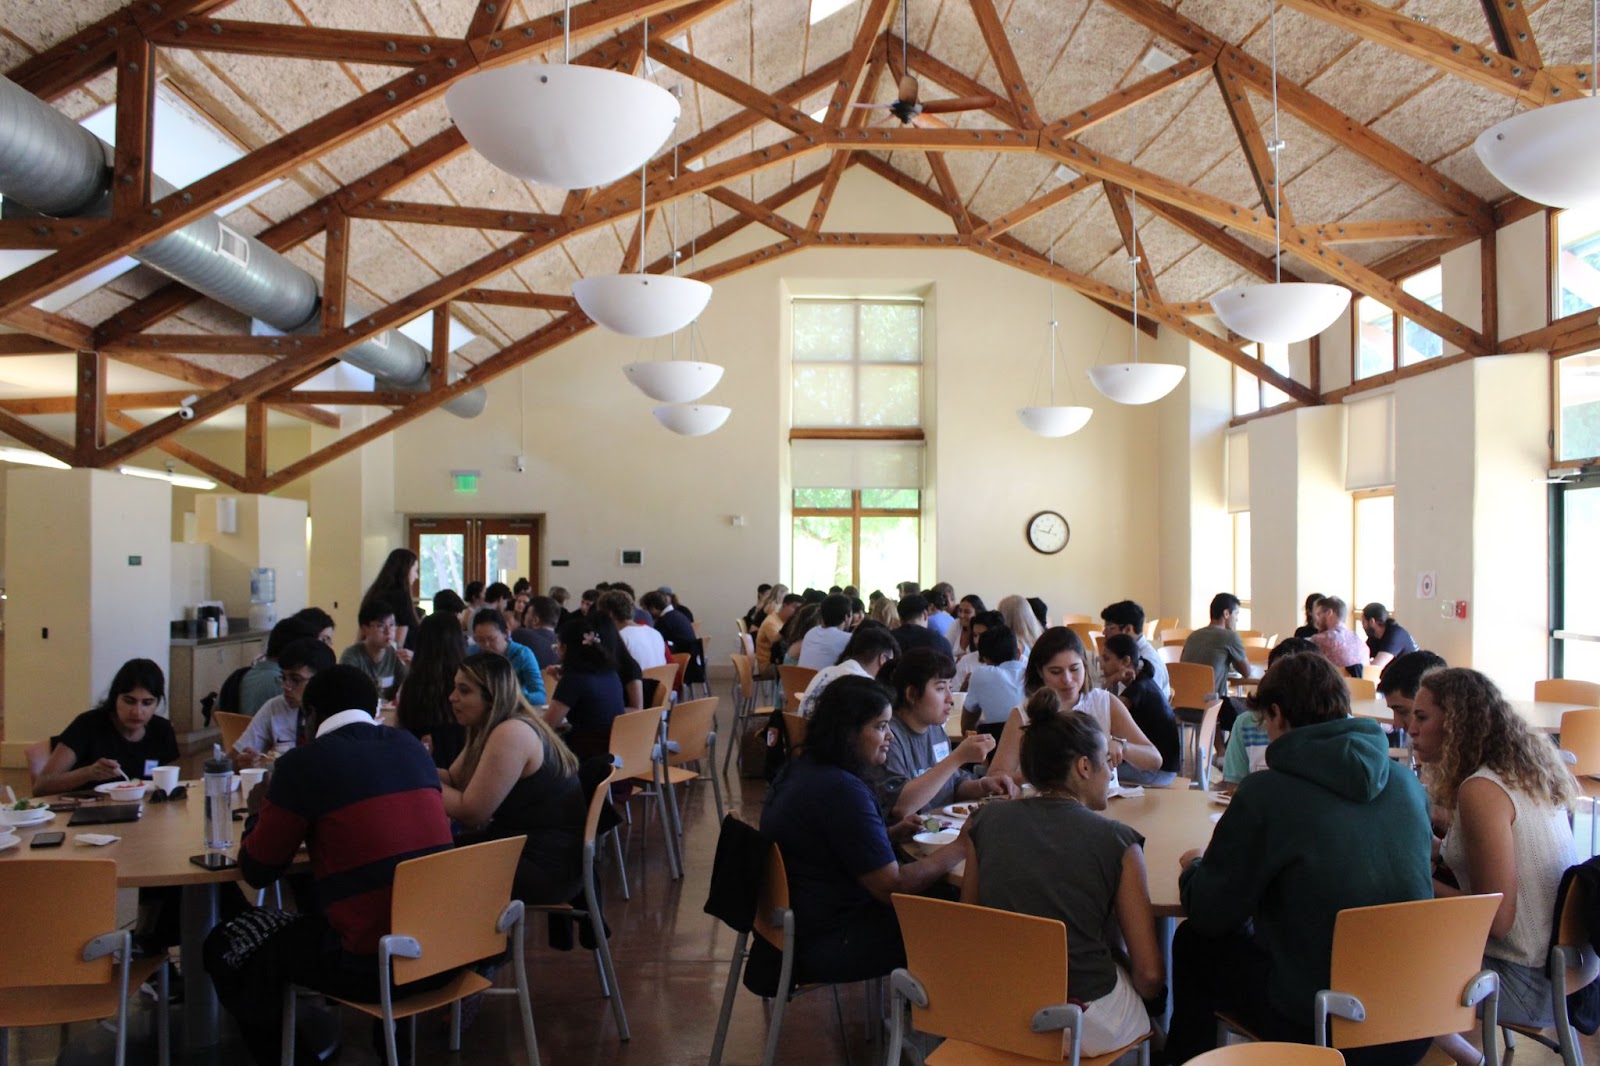 Residents at the retreat are having lunch in the dining hall.